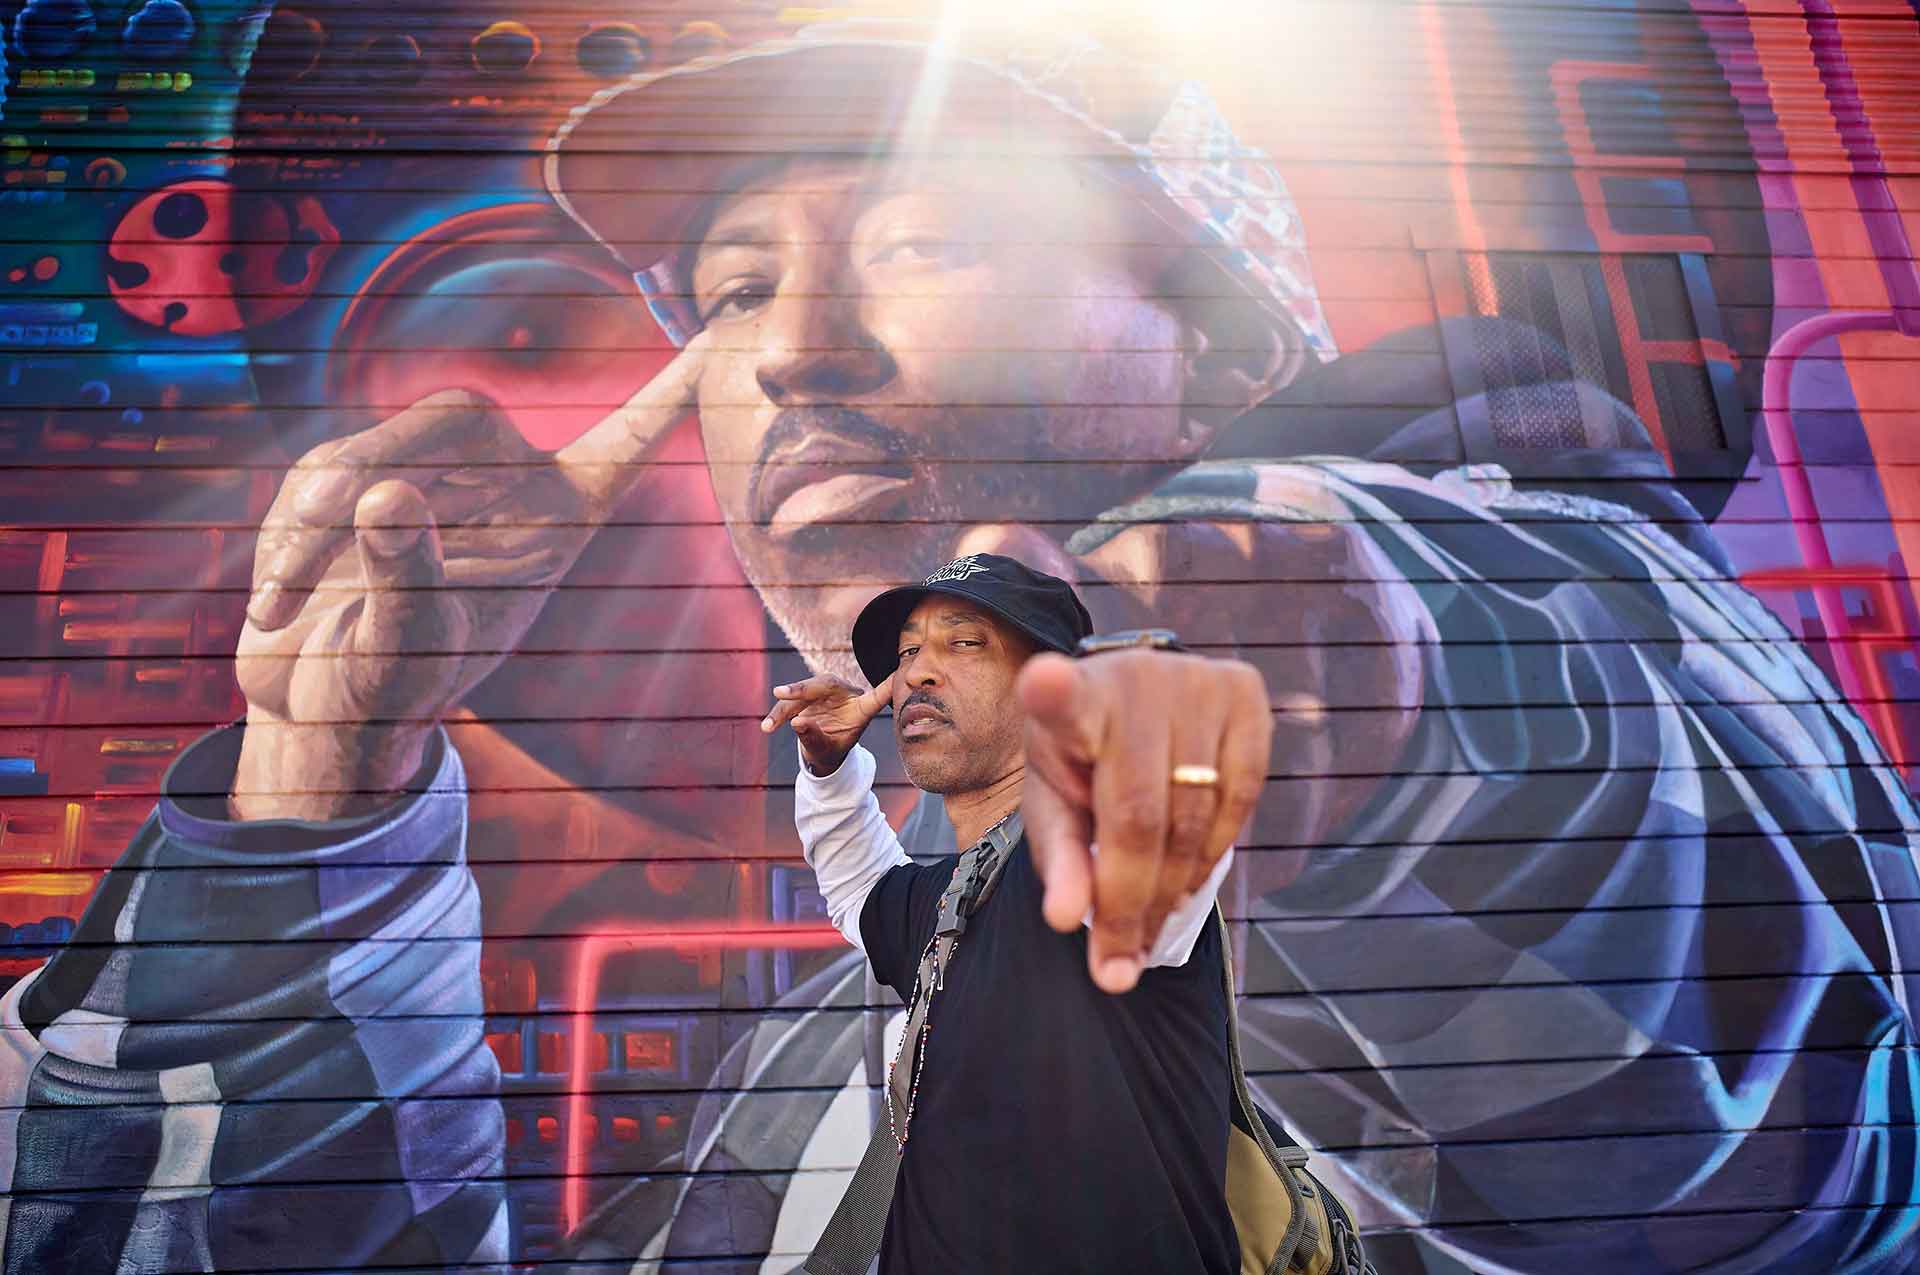 Phesto Dee of Souls of Mischief poses in front of his own likeness, painted as part of a mural in East Oakland.